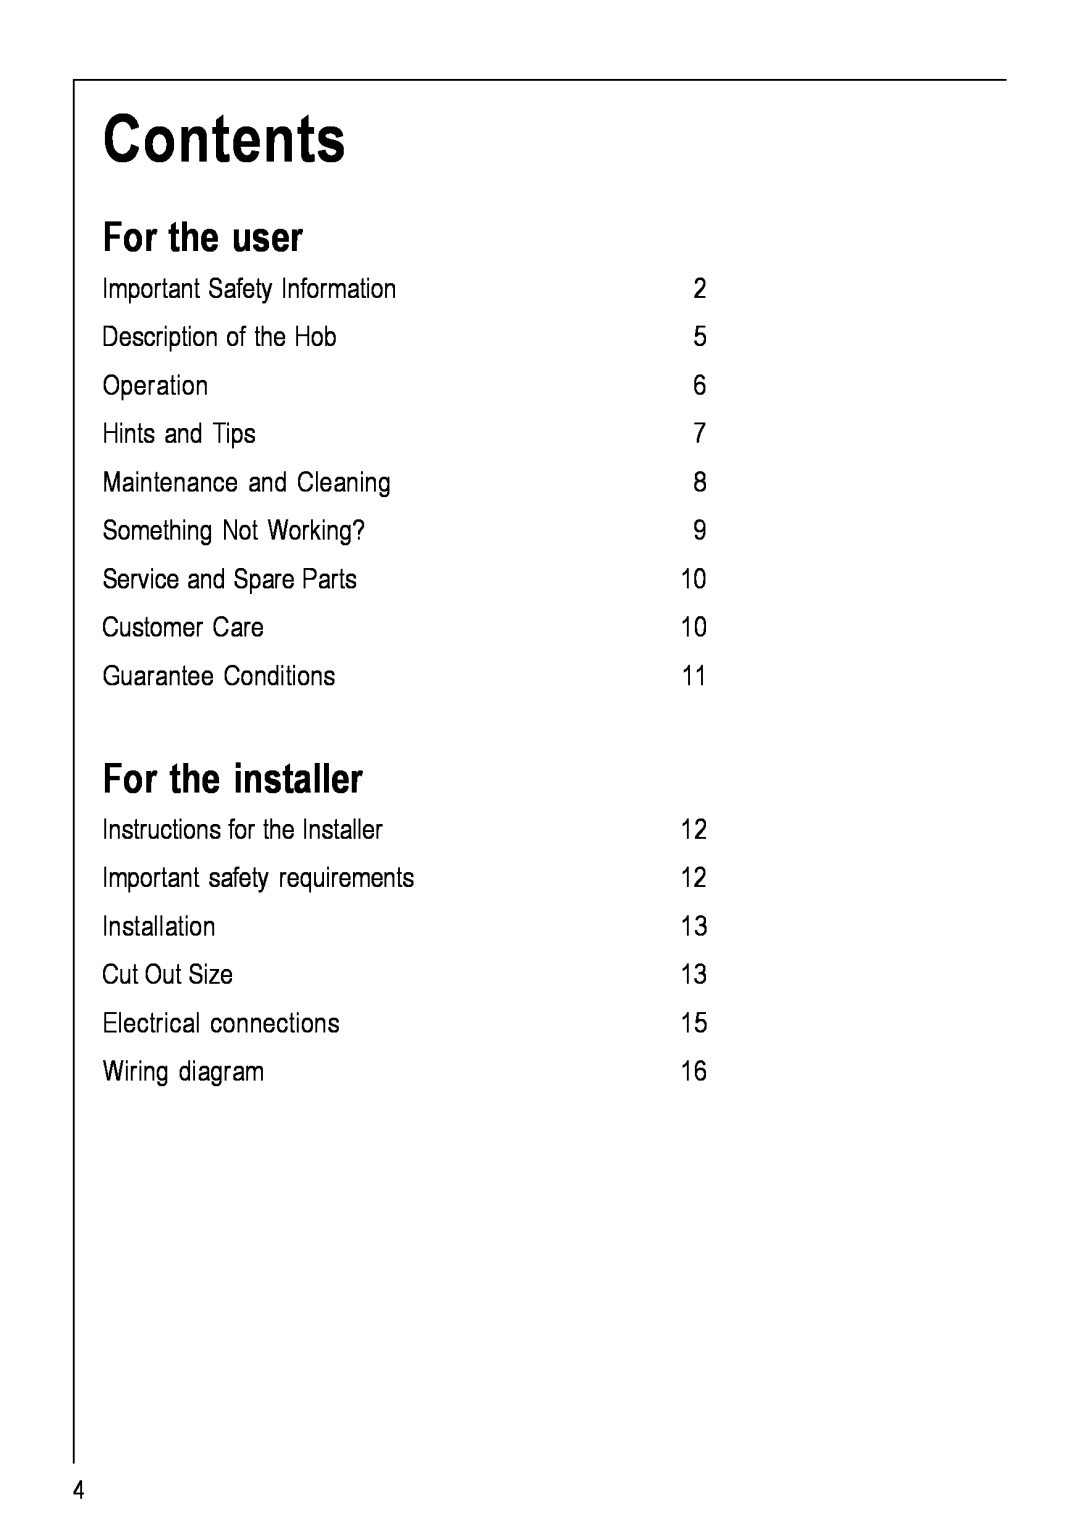 Electrolux 111 K operating instructions Contents, For the user, For the installer 